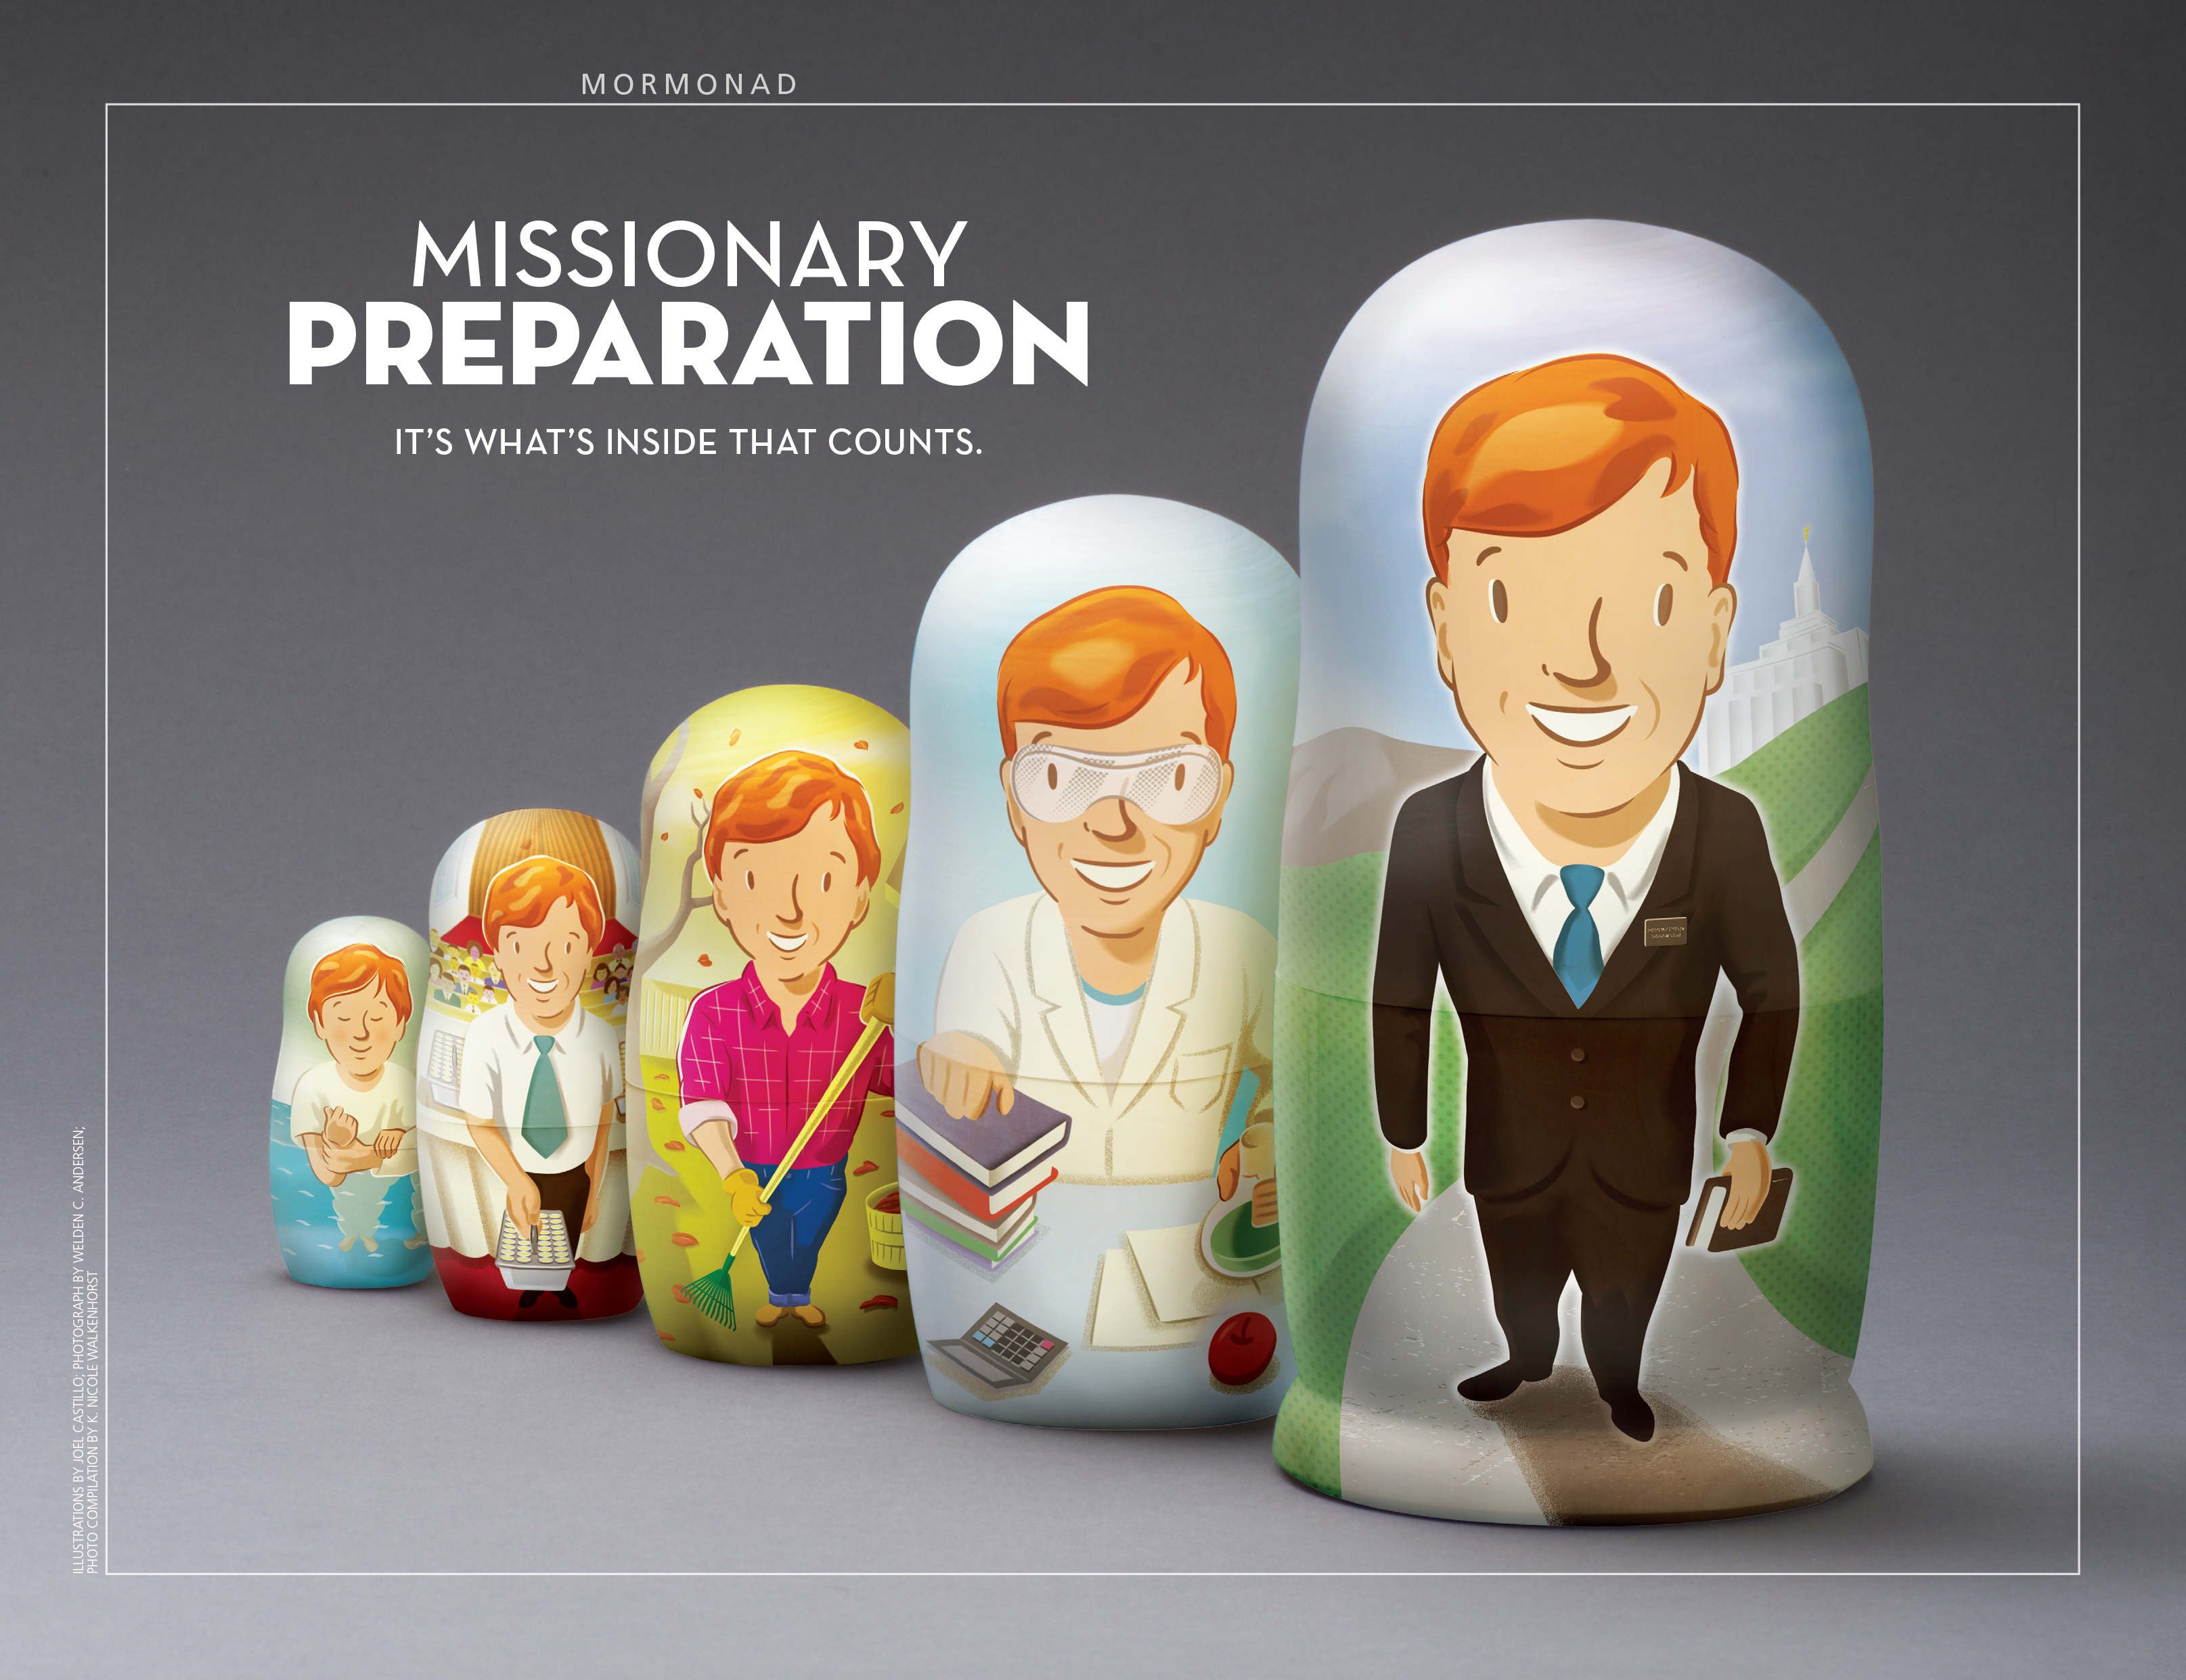 A poster of nesting dolls outlining steps to mission preparation, paired with the words “Missionary Preparation.”